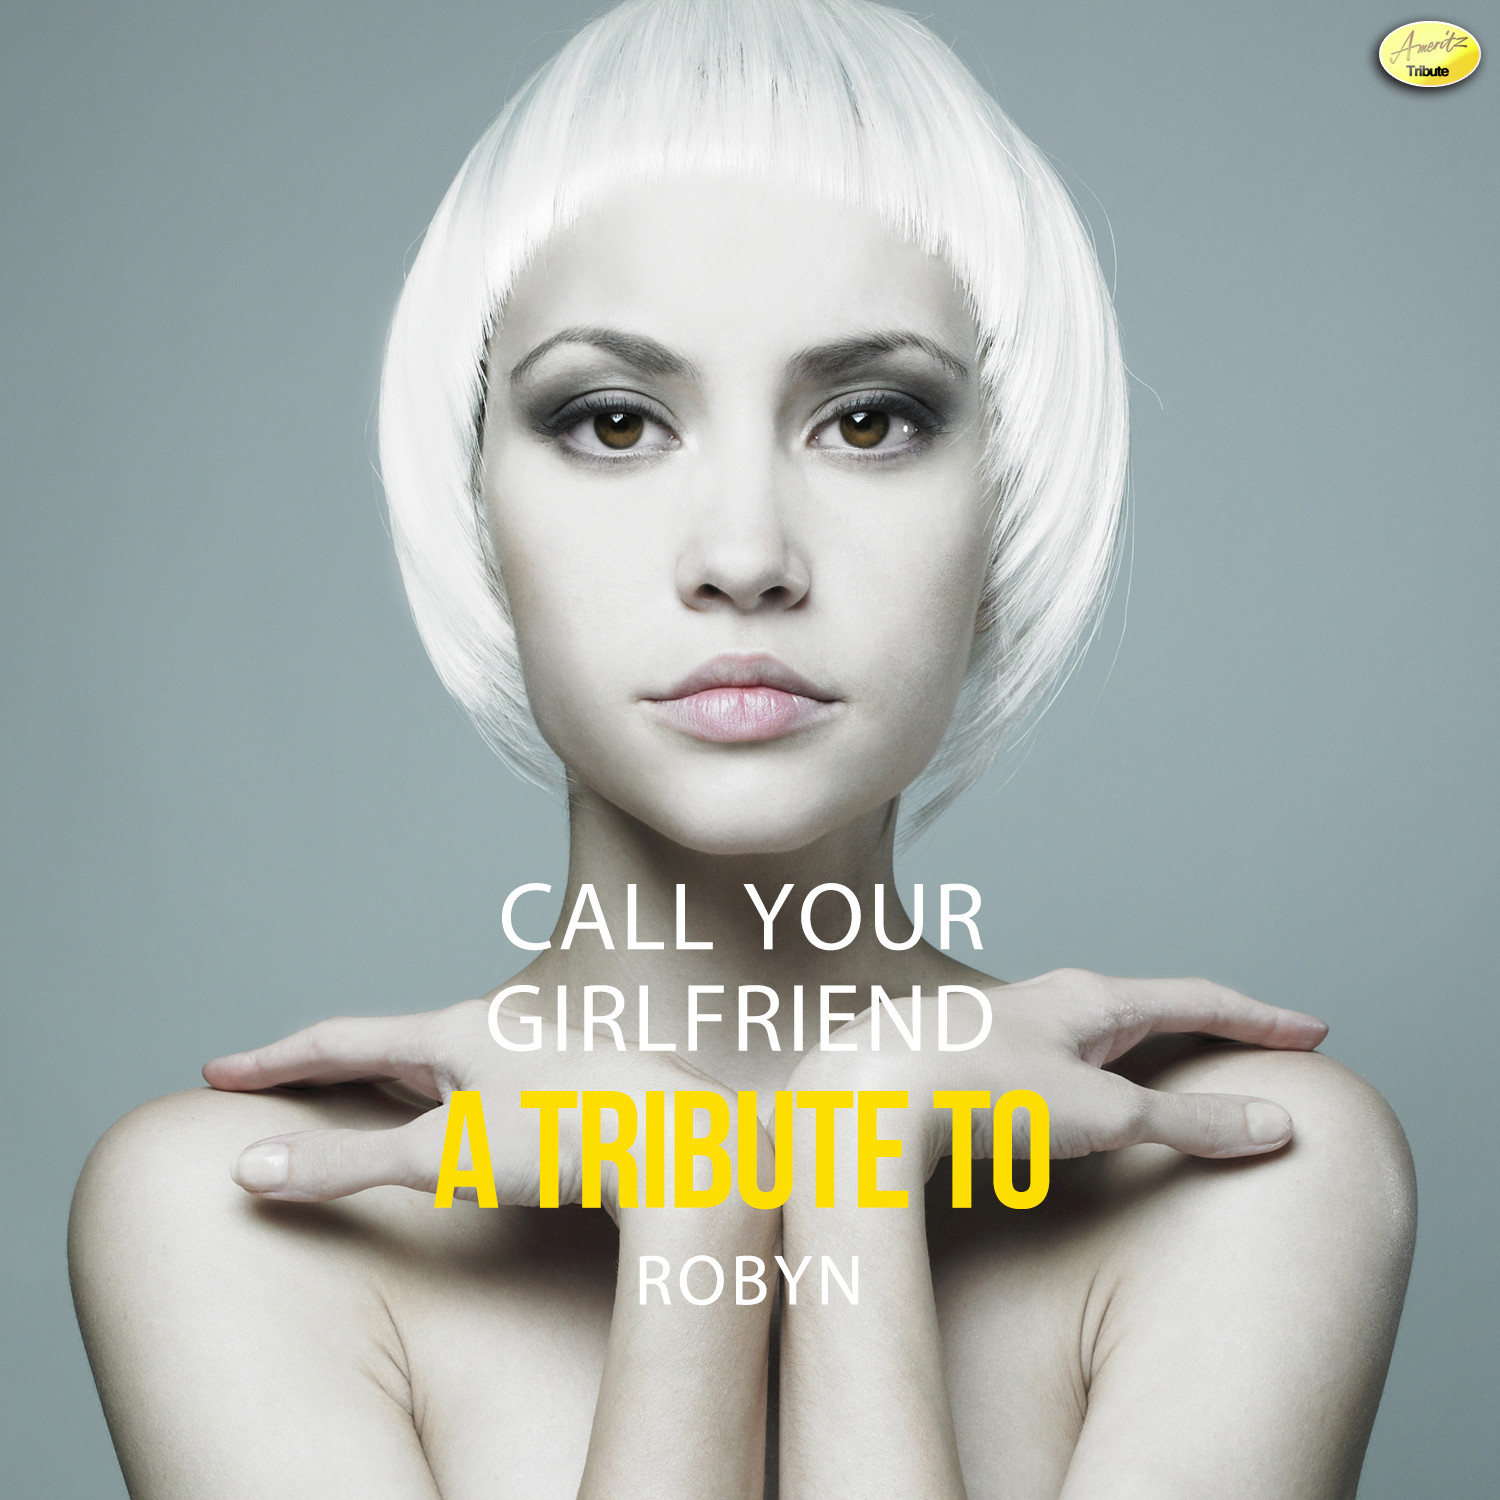 Call Your Girlfriend - A Tribute to Robyn